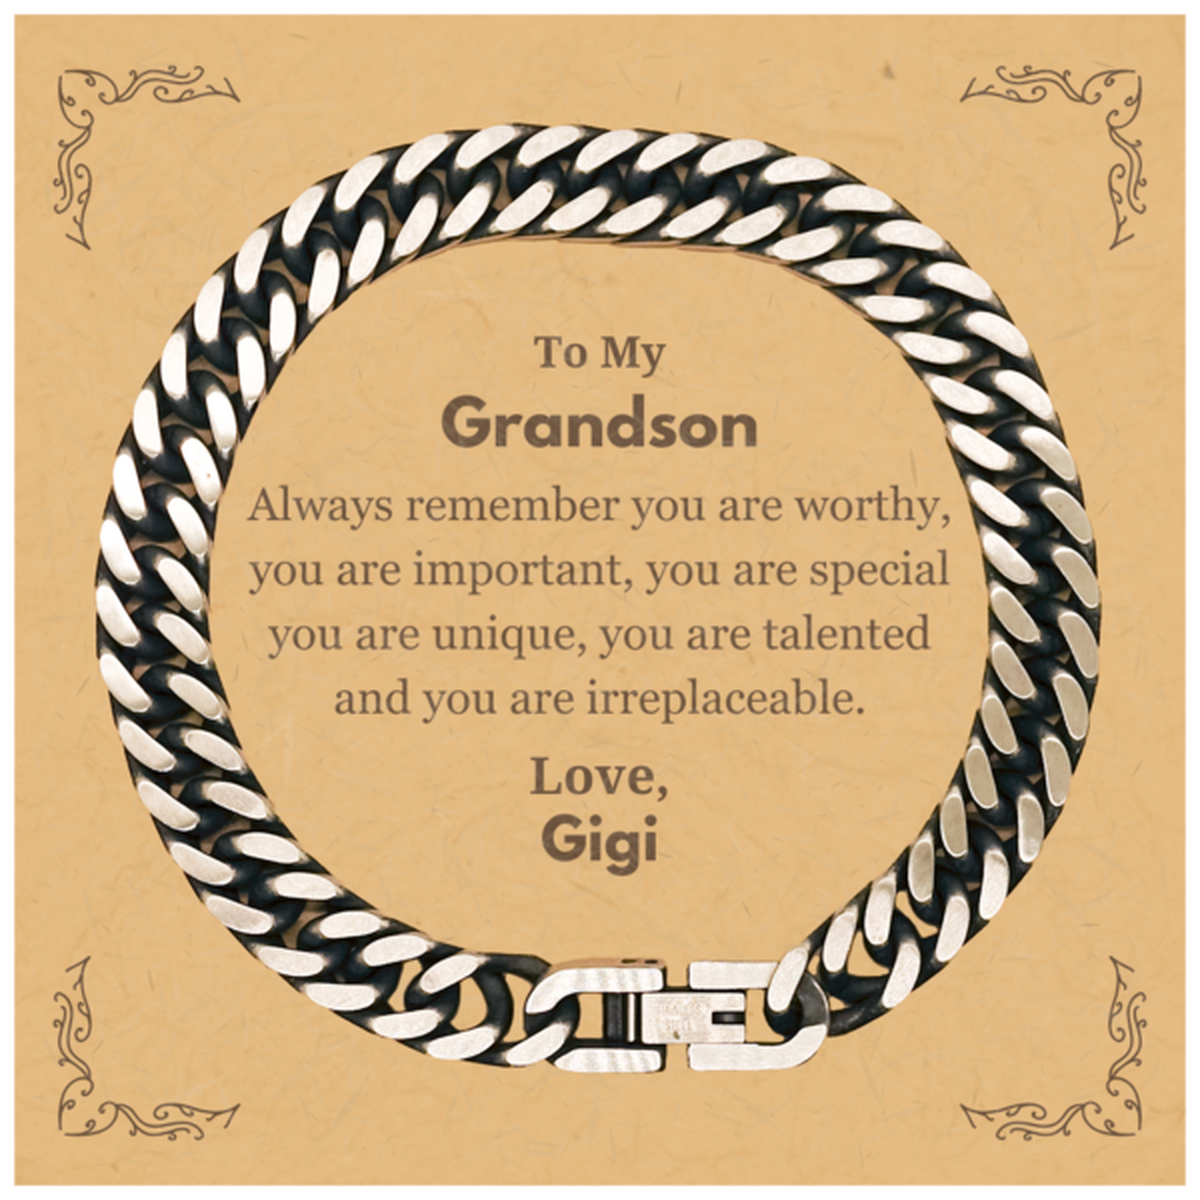 Grandson Birthday Gifts from Gigi, Inspirational Cuban Link Chain Bracelet for Grandson Christmas Graduation Gifts for Grandson Always remember you are worthy, you are important. Love, Gigi